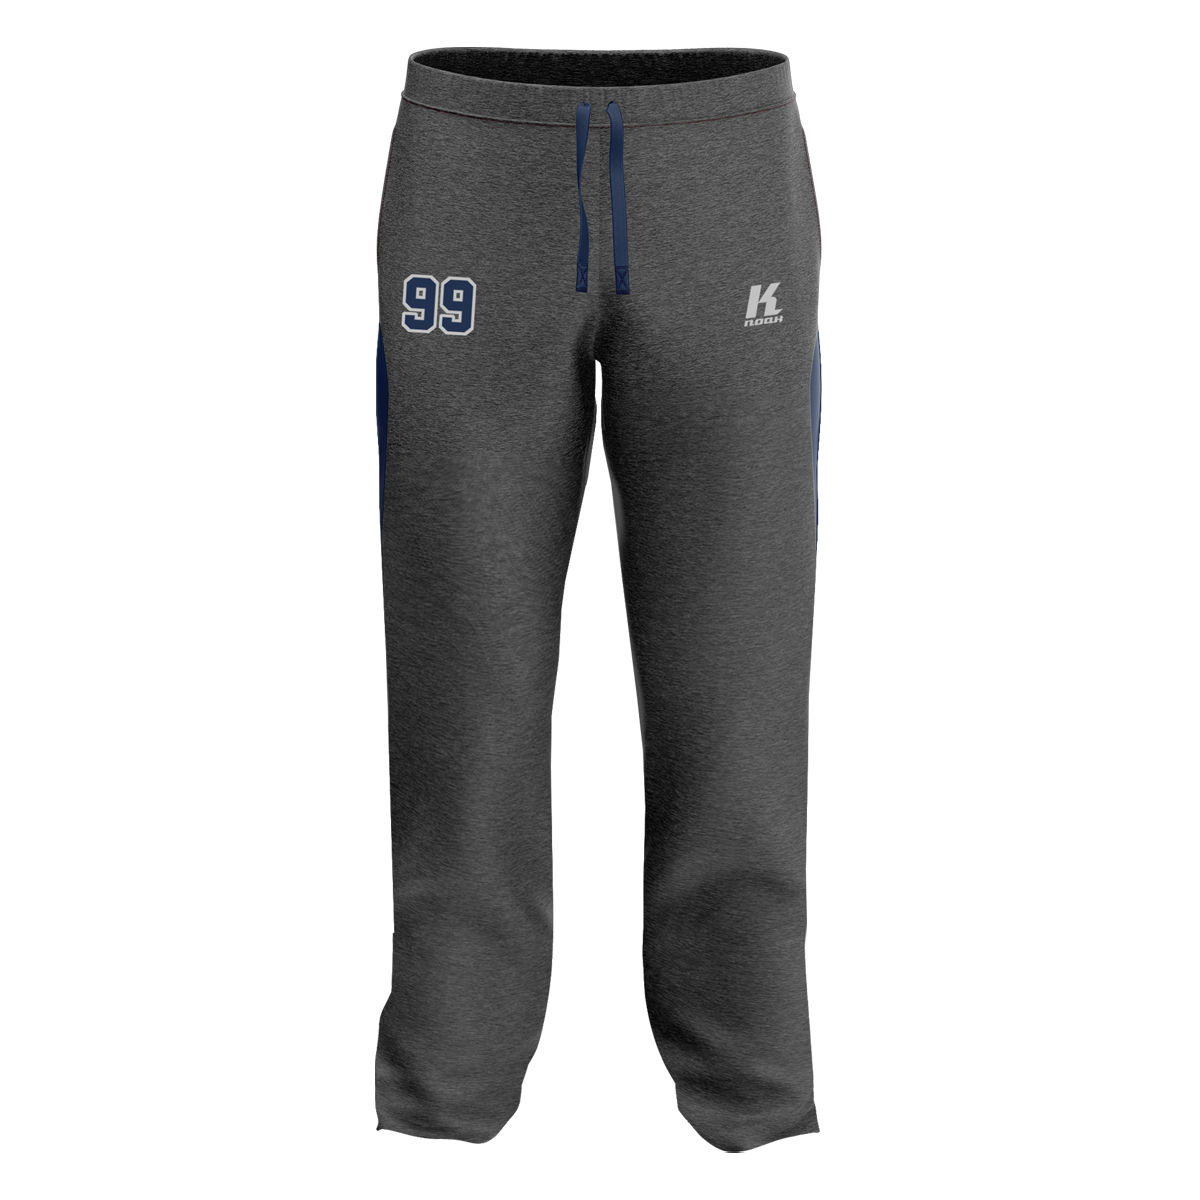 Hammers Signature Series Sweat Pant with Playernumber/Initials